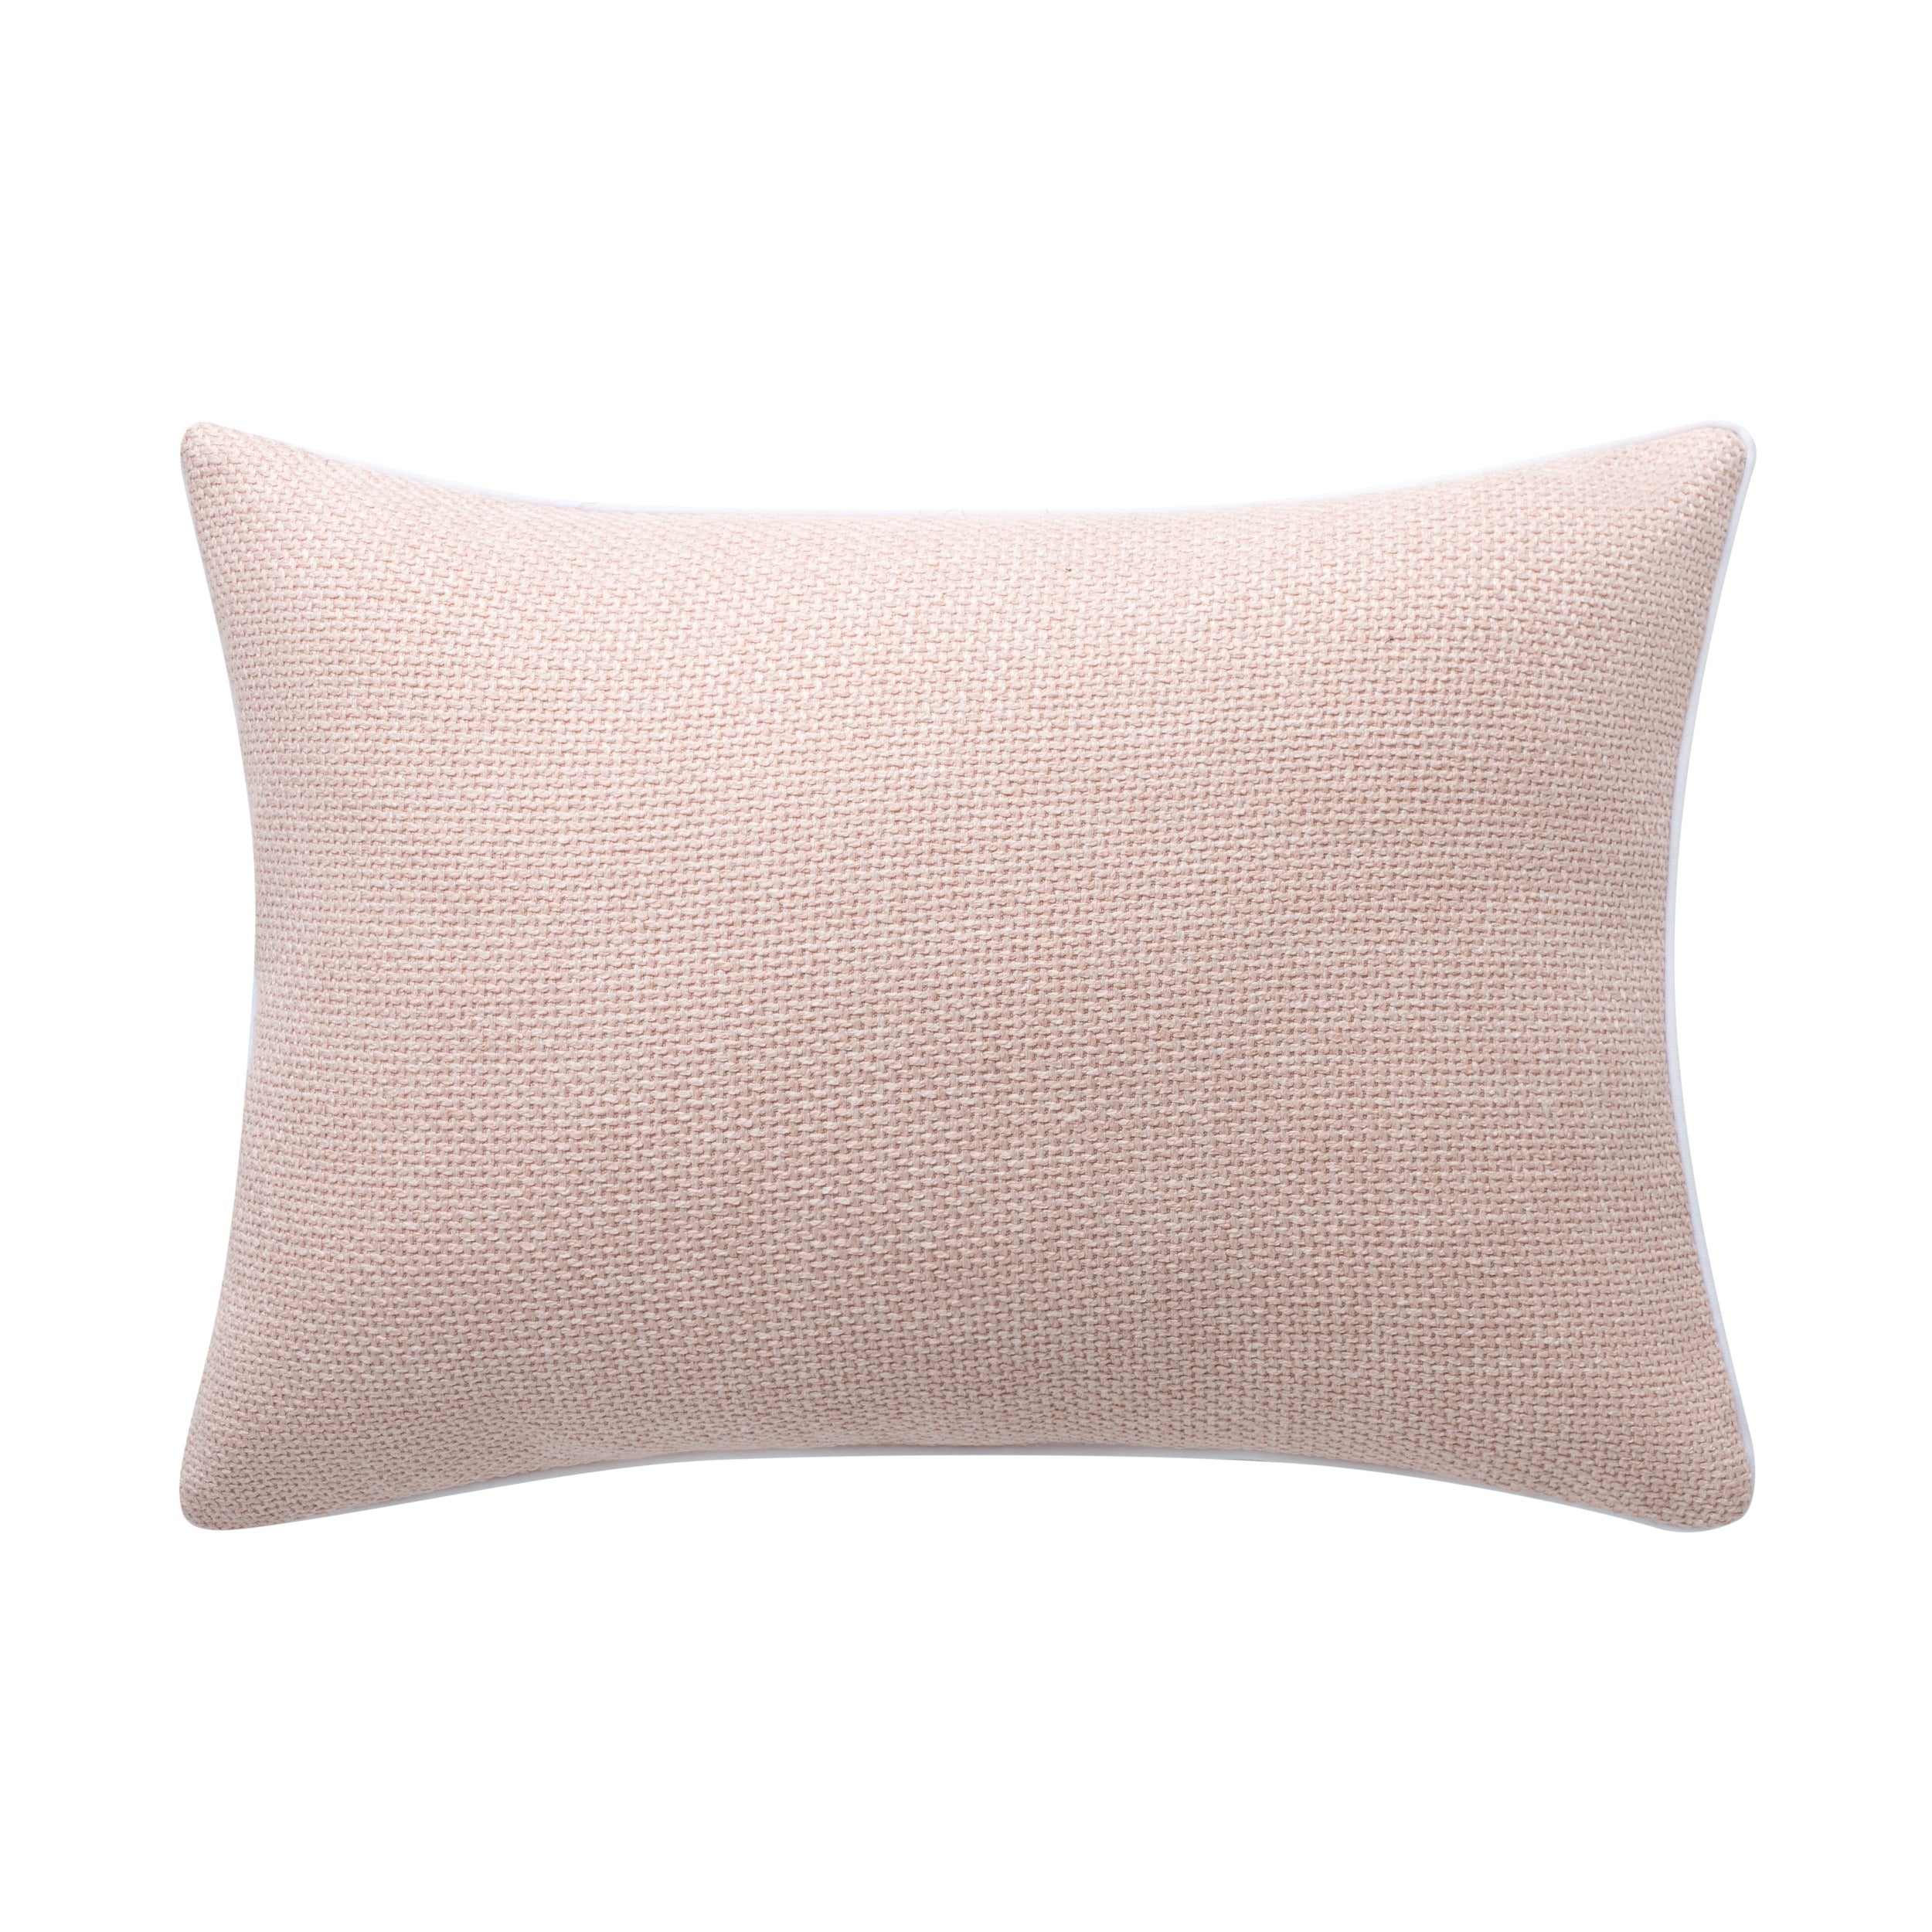 Petite Belle Ballet Pink Textured Throw Pillow with White Piping